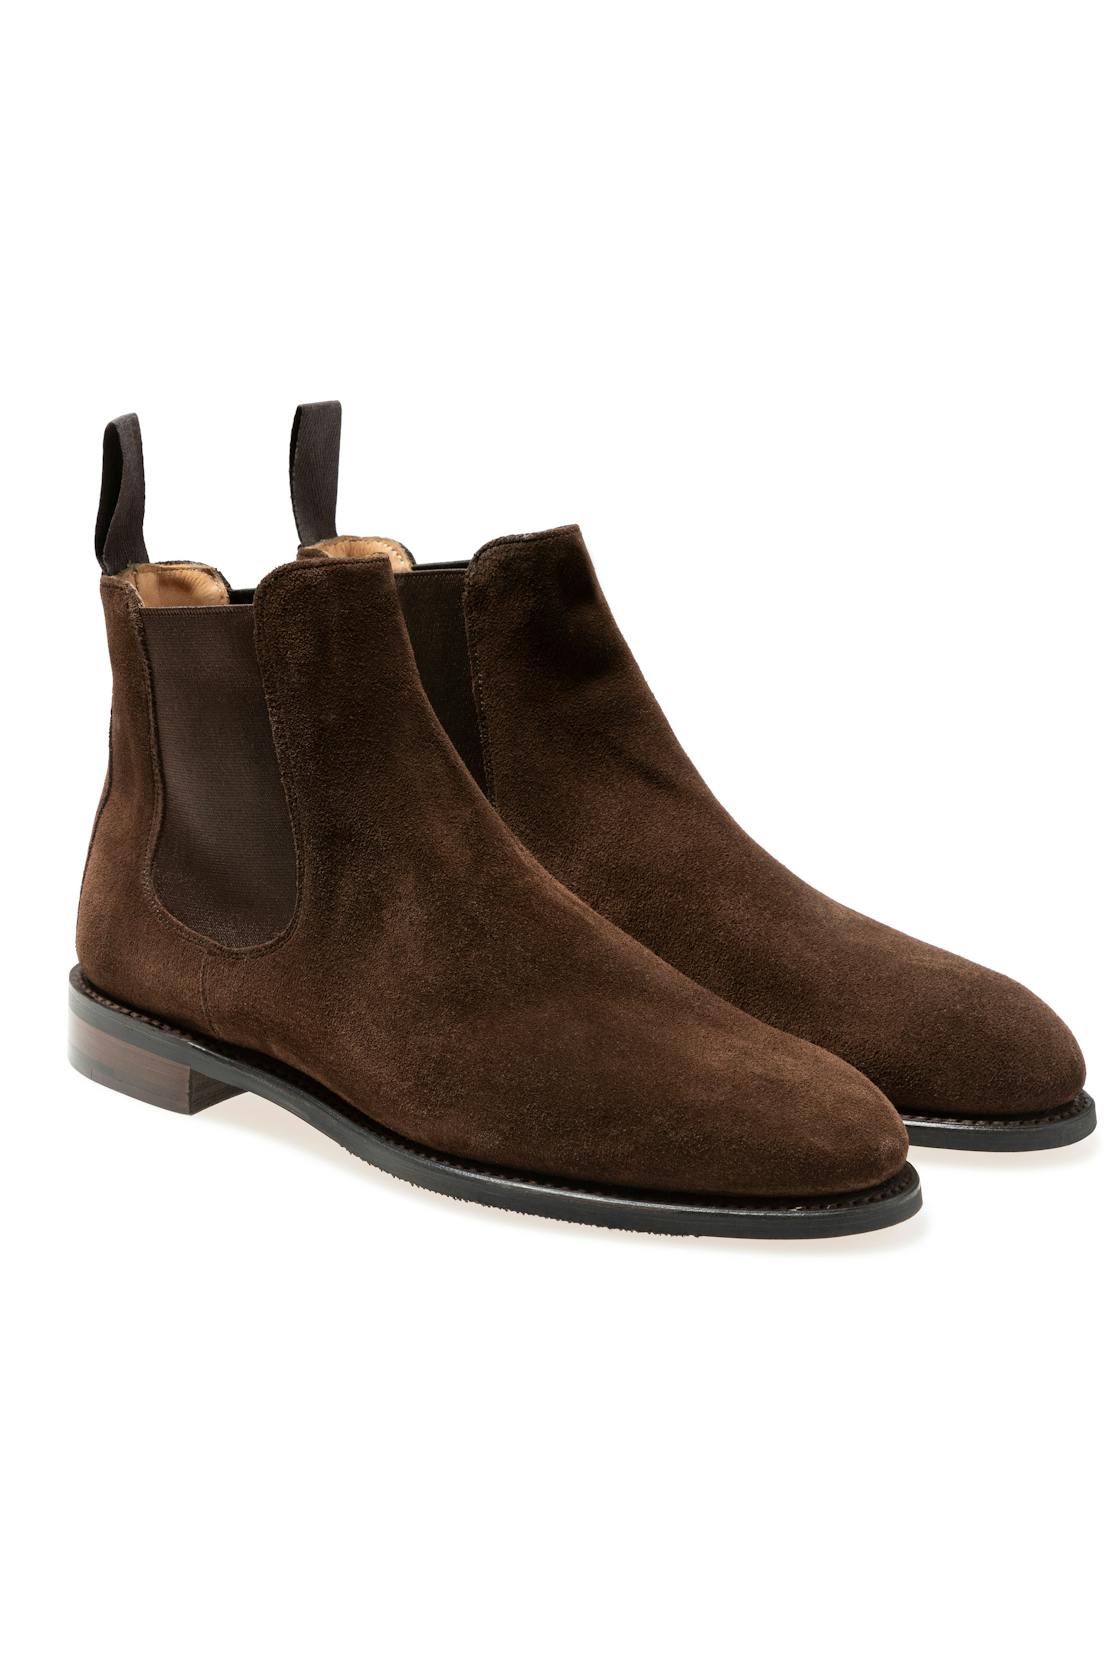 The Armoury Ryoma Chocolate Suede Chelsea Boots *factory seconds*